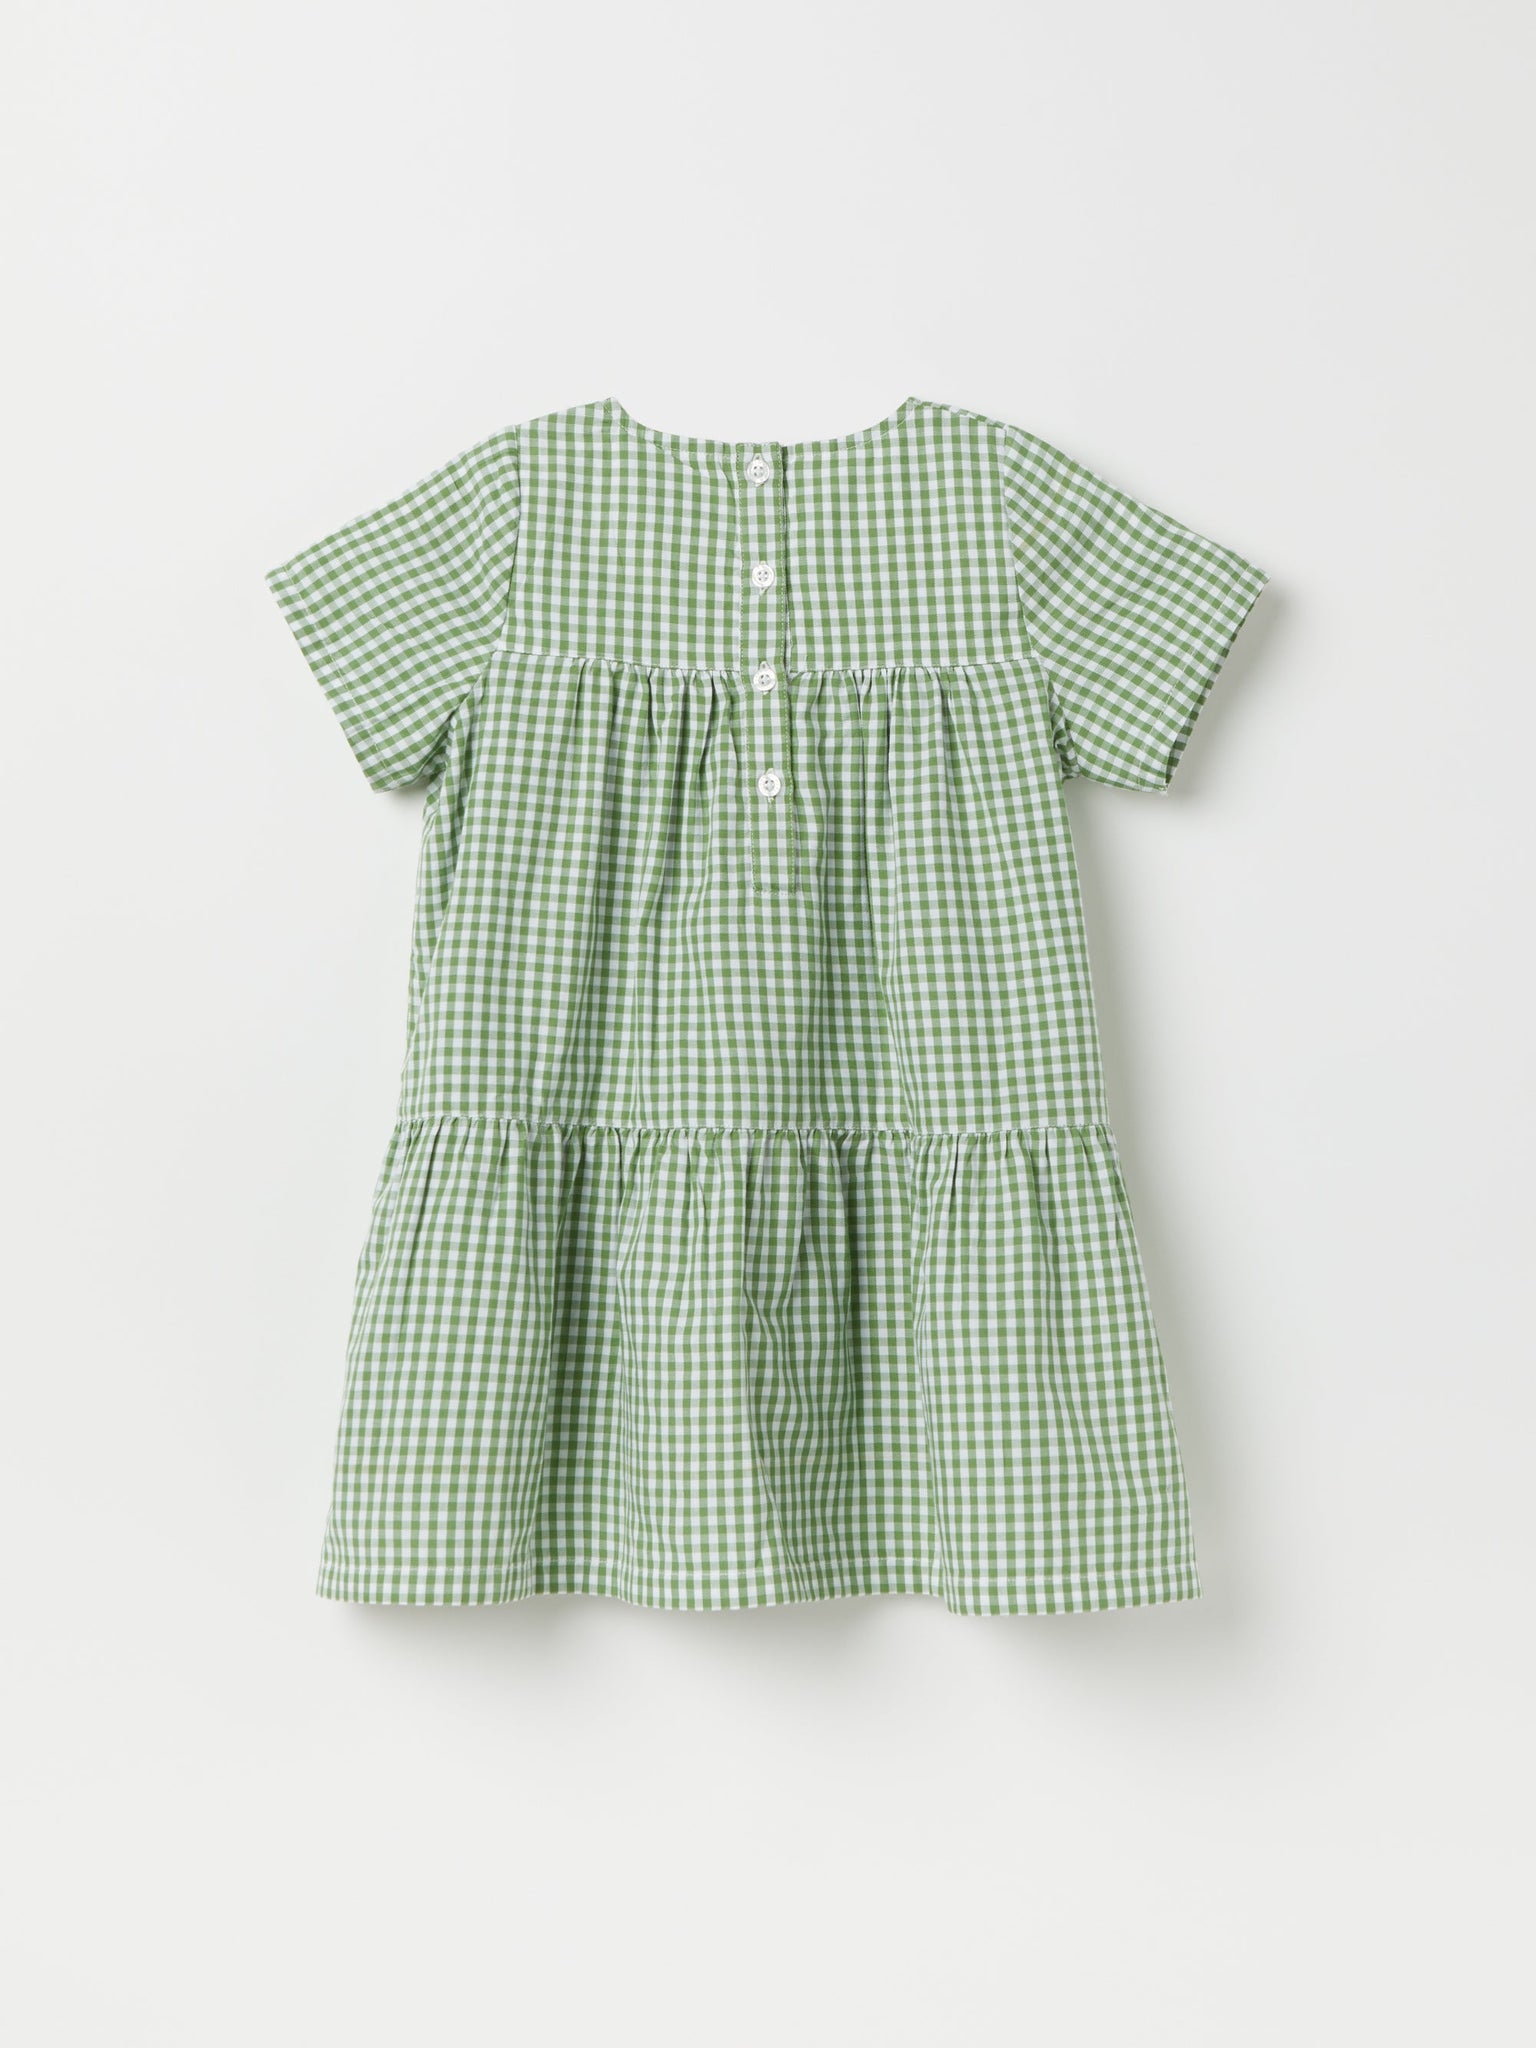 Green Gingham Check Kids Dress from the Polarn O. Pyret kidswear collection. Nordic kids clothes made from sustainable sources.